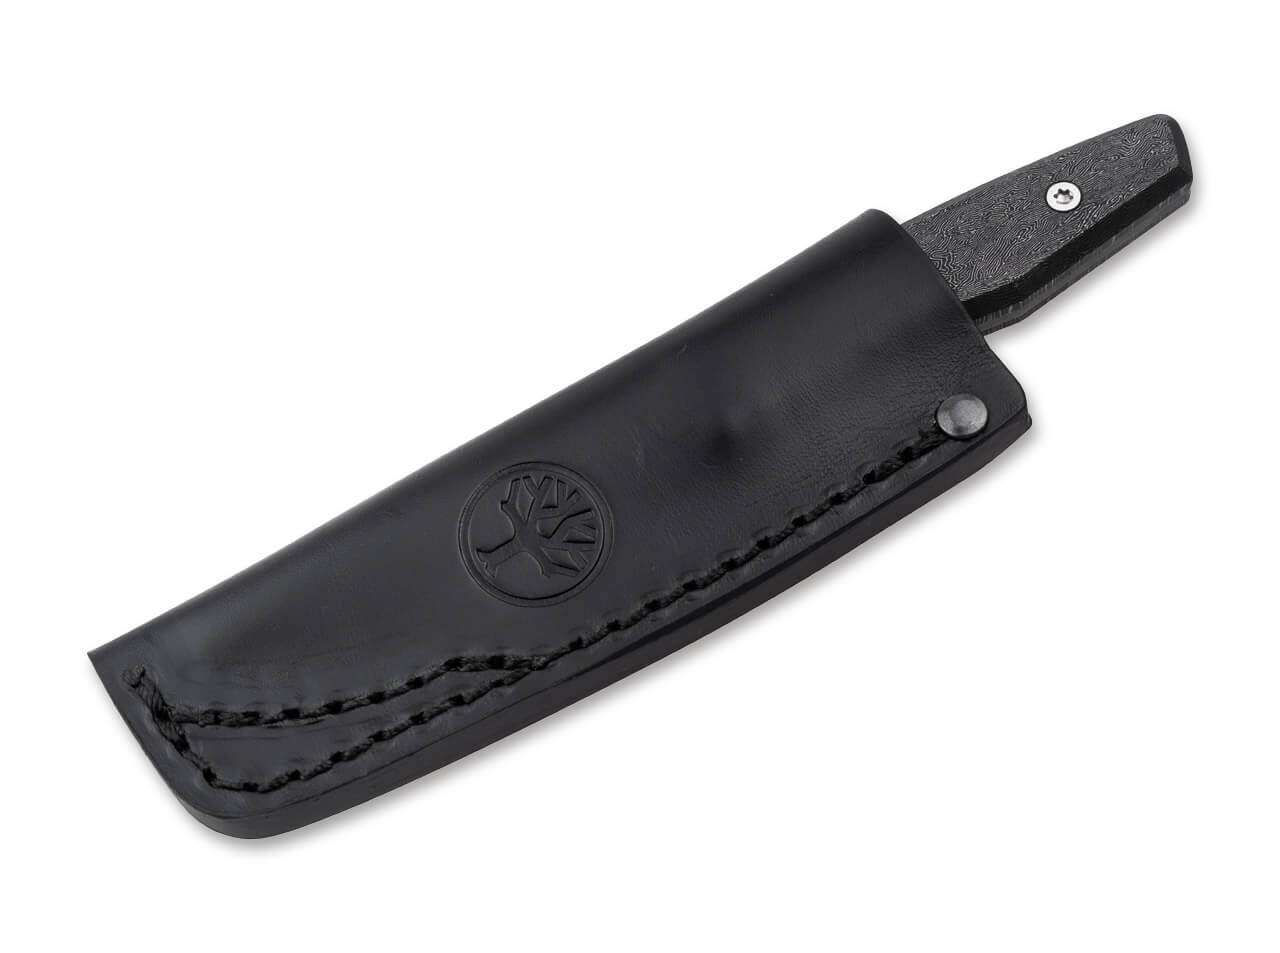 A Polish combat knife, Maker Radom Single-edged blade with a pandour point,  maker code 11 in oval above year 1956 and number R06241. Burnished  steel scabbard numbered M02575, leather carrying strap. Length